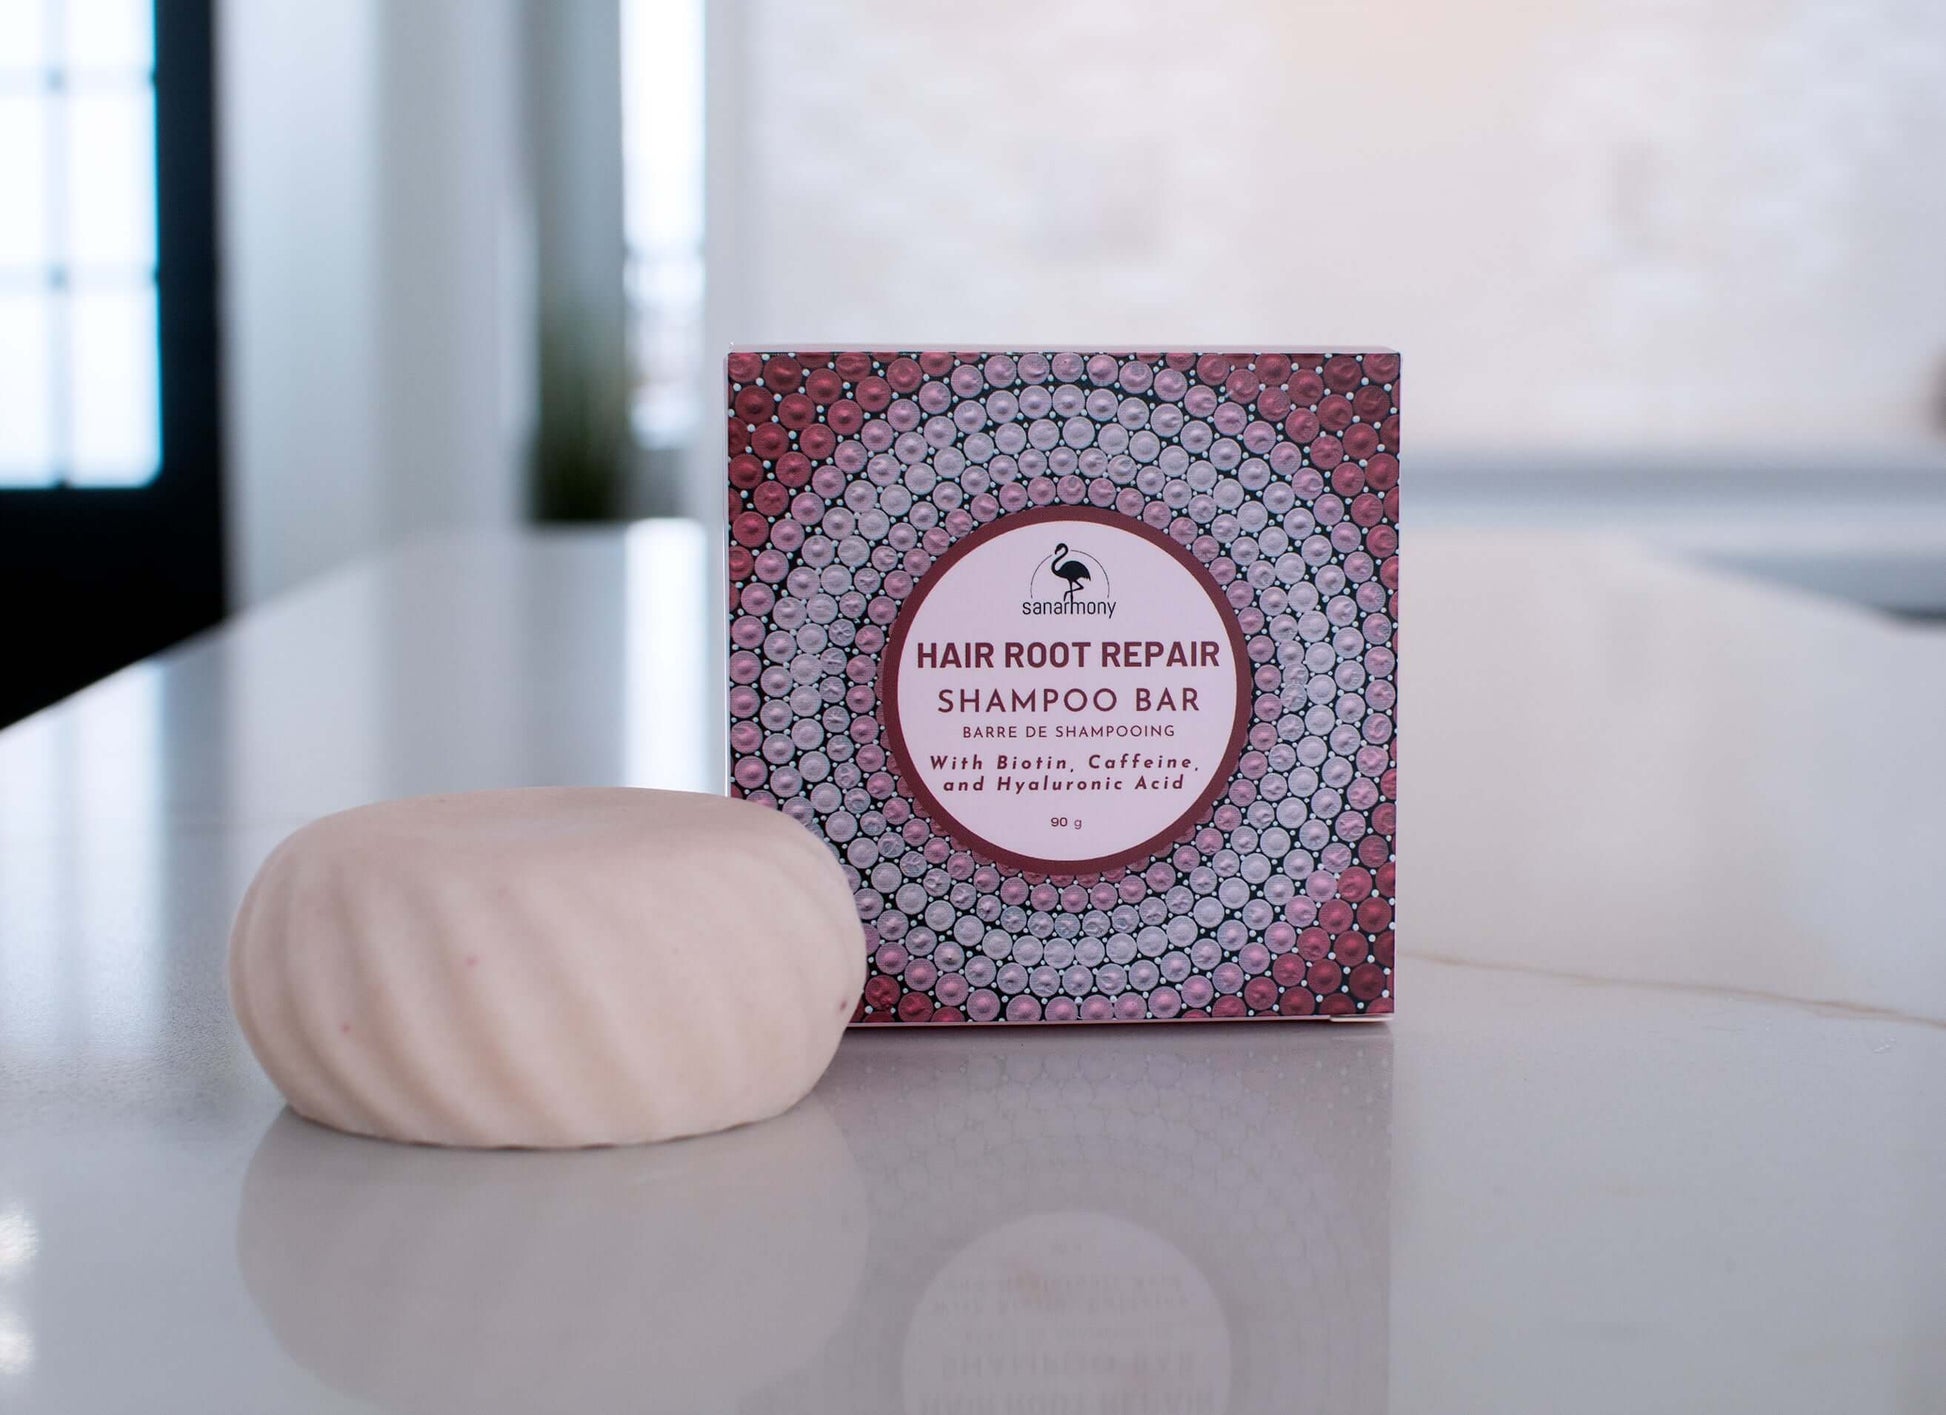 Elevate Your Hair Game with Our Shampoo Bar Experience ultimate hair transformation with our Biotin, Caffeine, & Hyaluronic acid formula for unmatched growth, smoothness, and anti-aging.